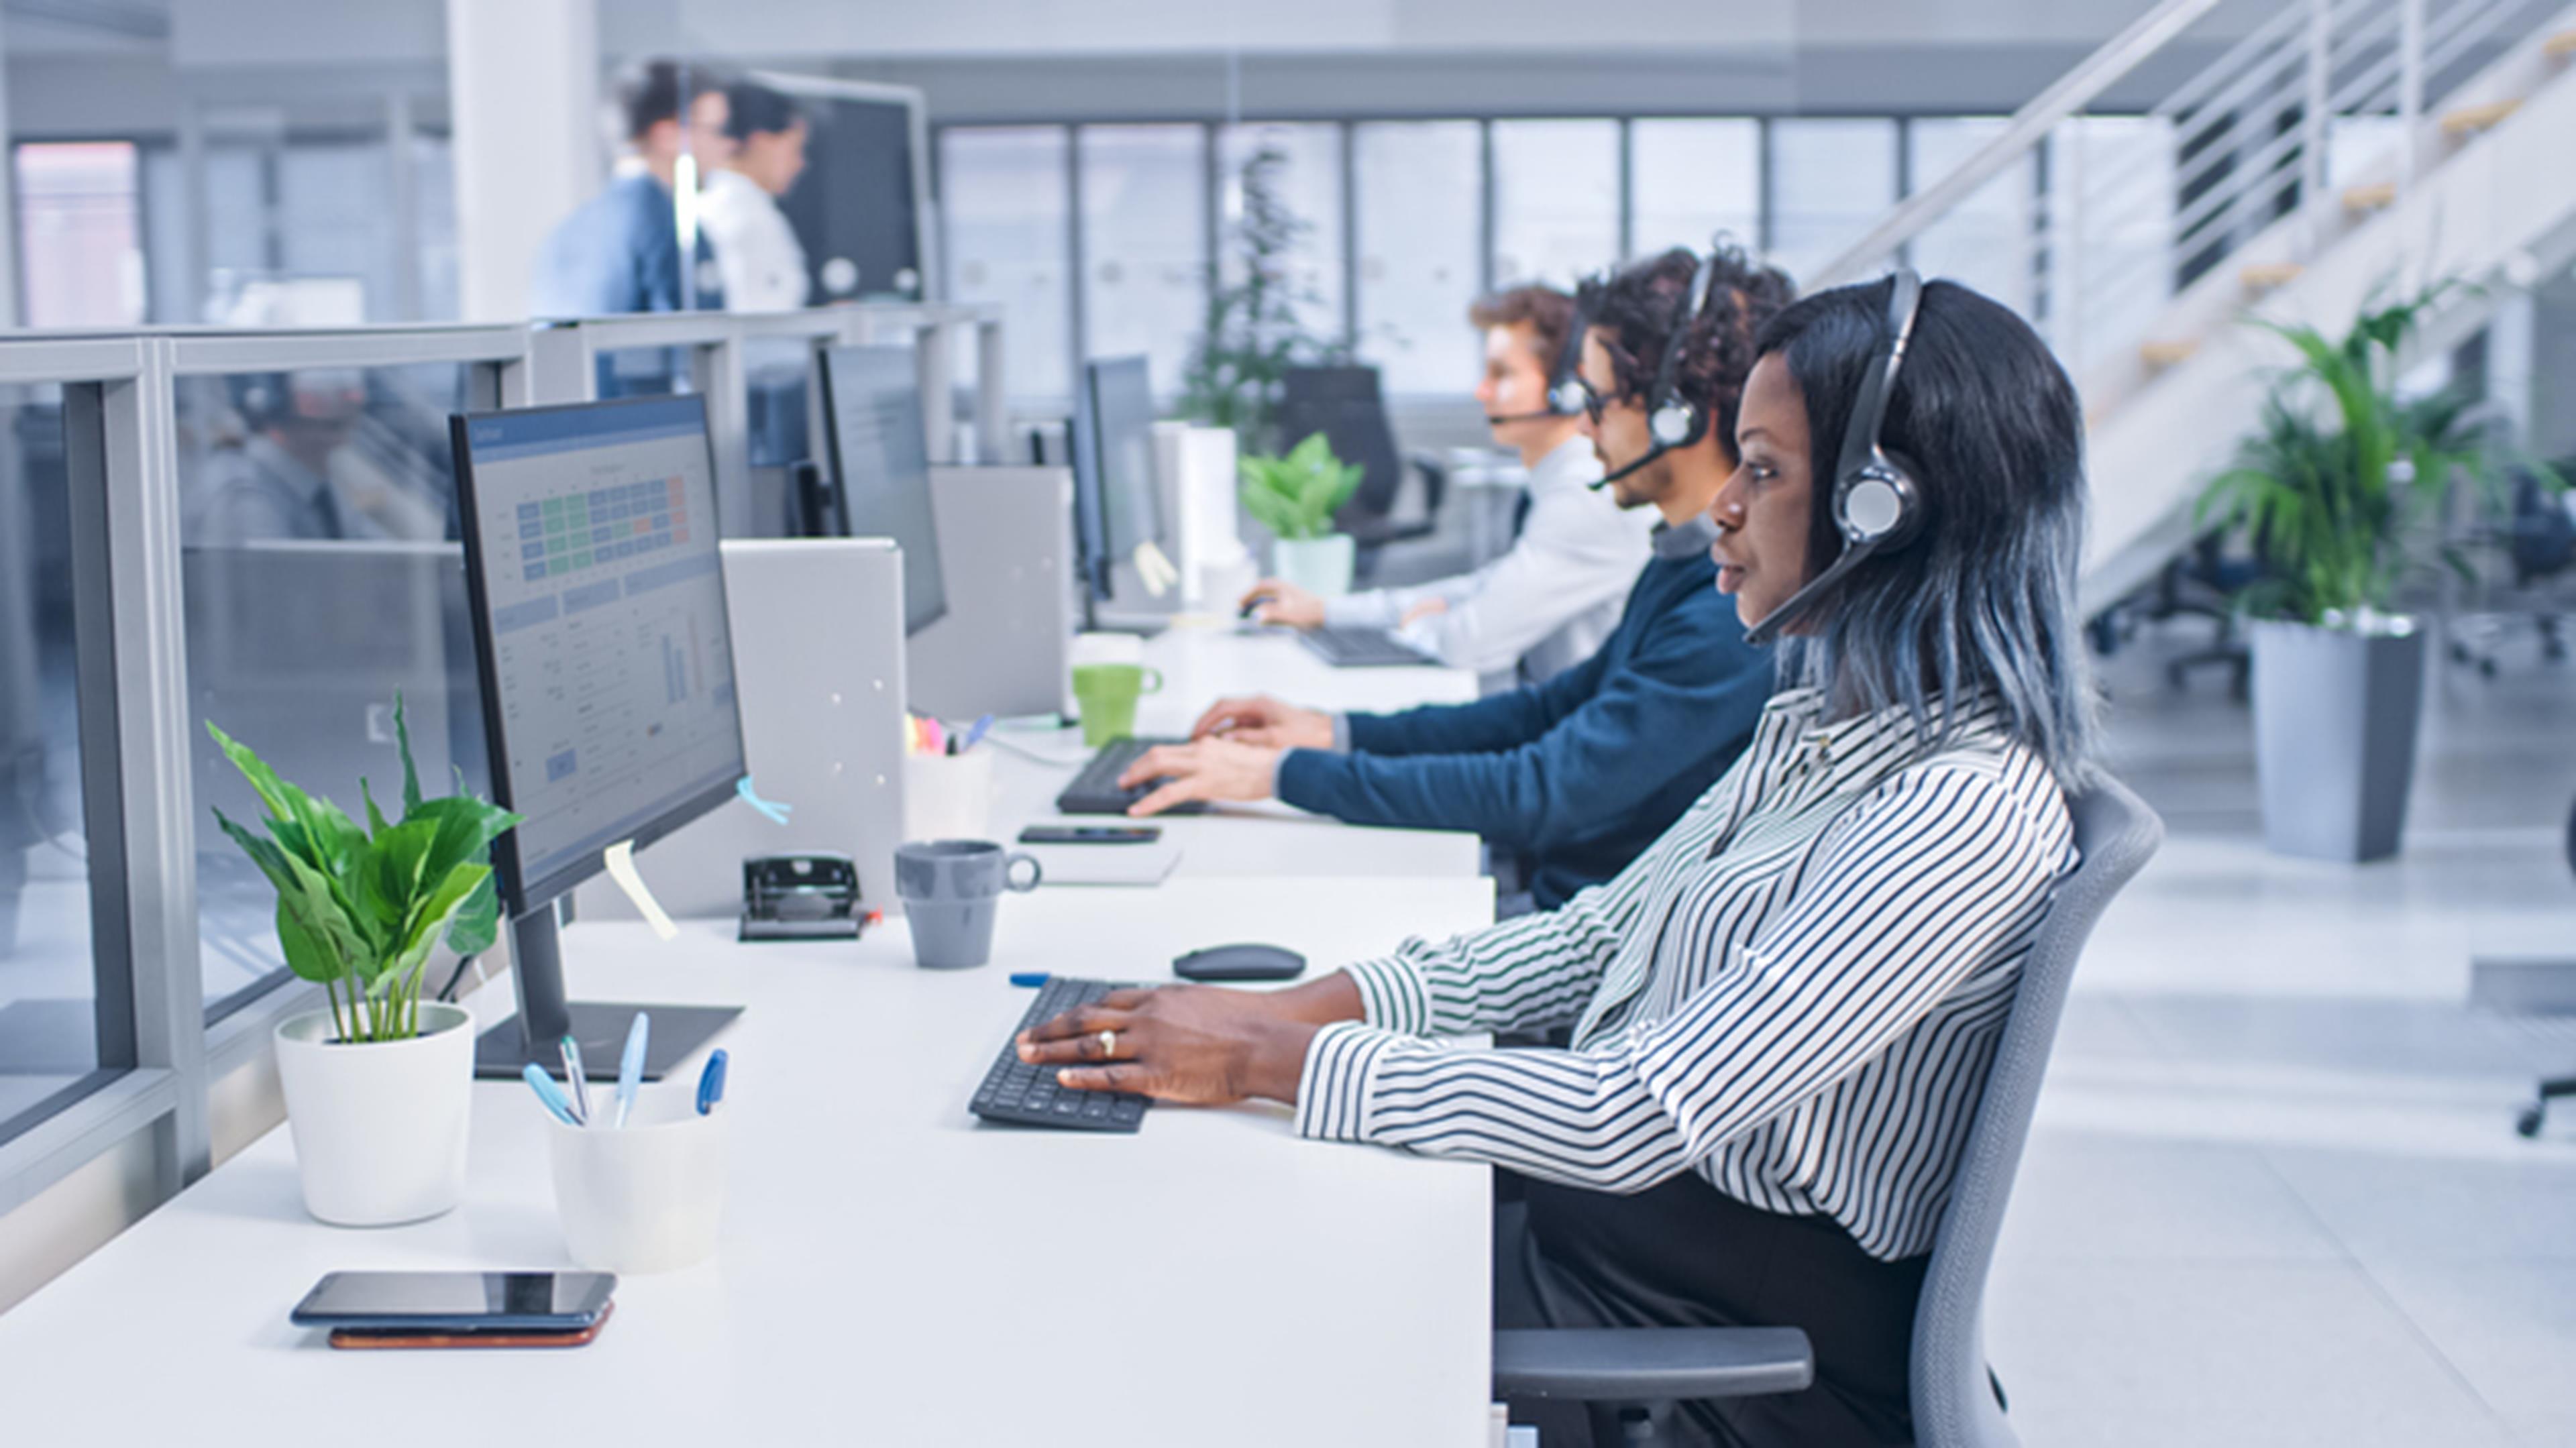 agents working in a call center